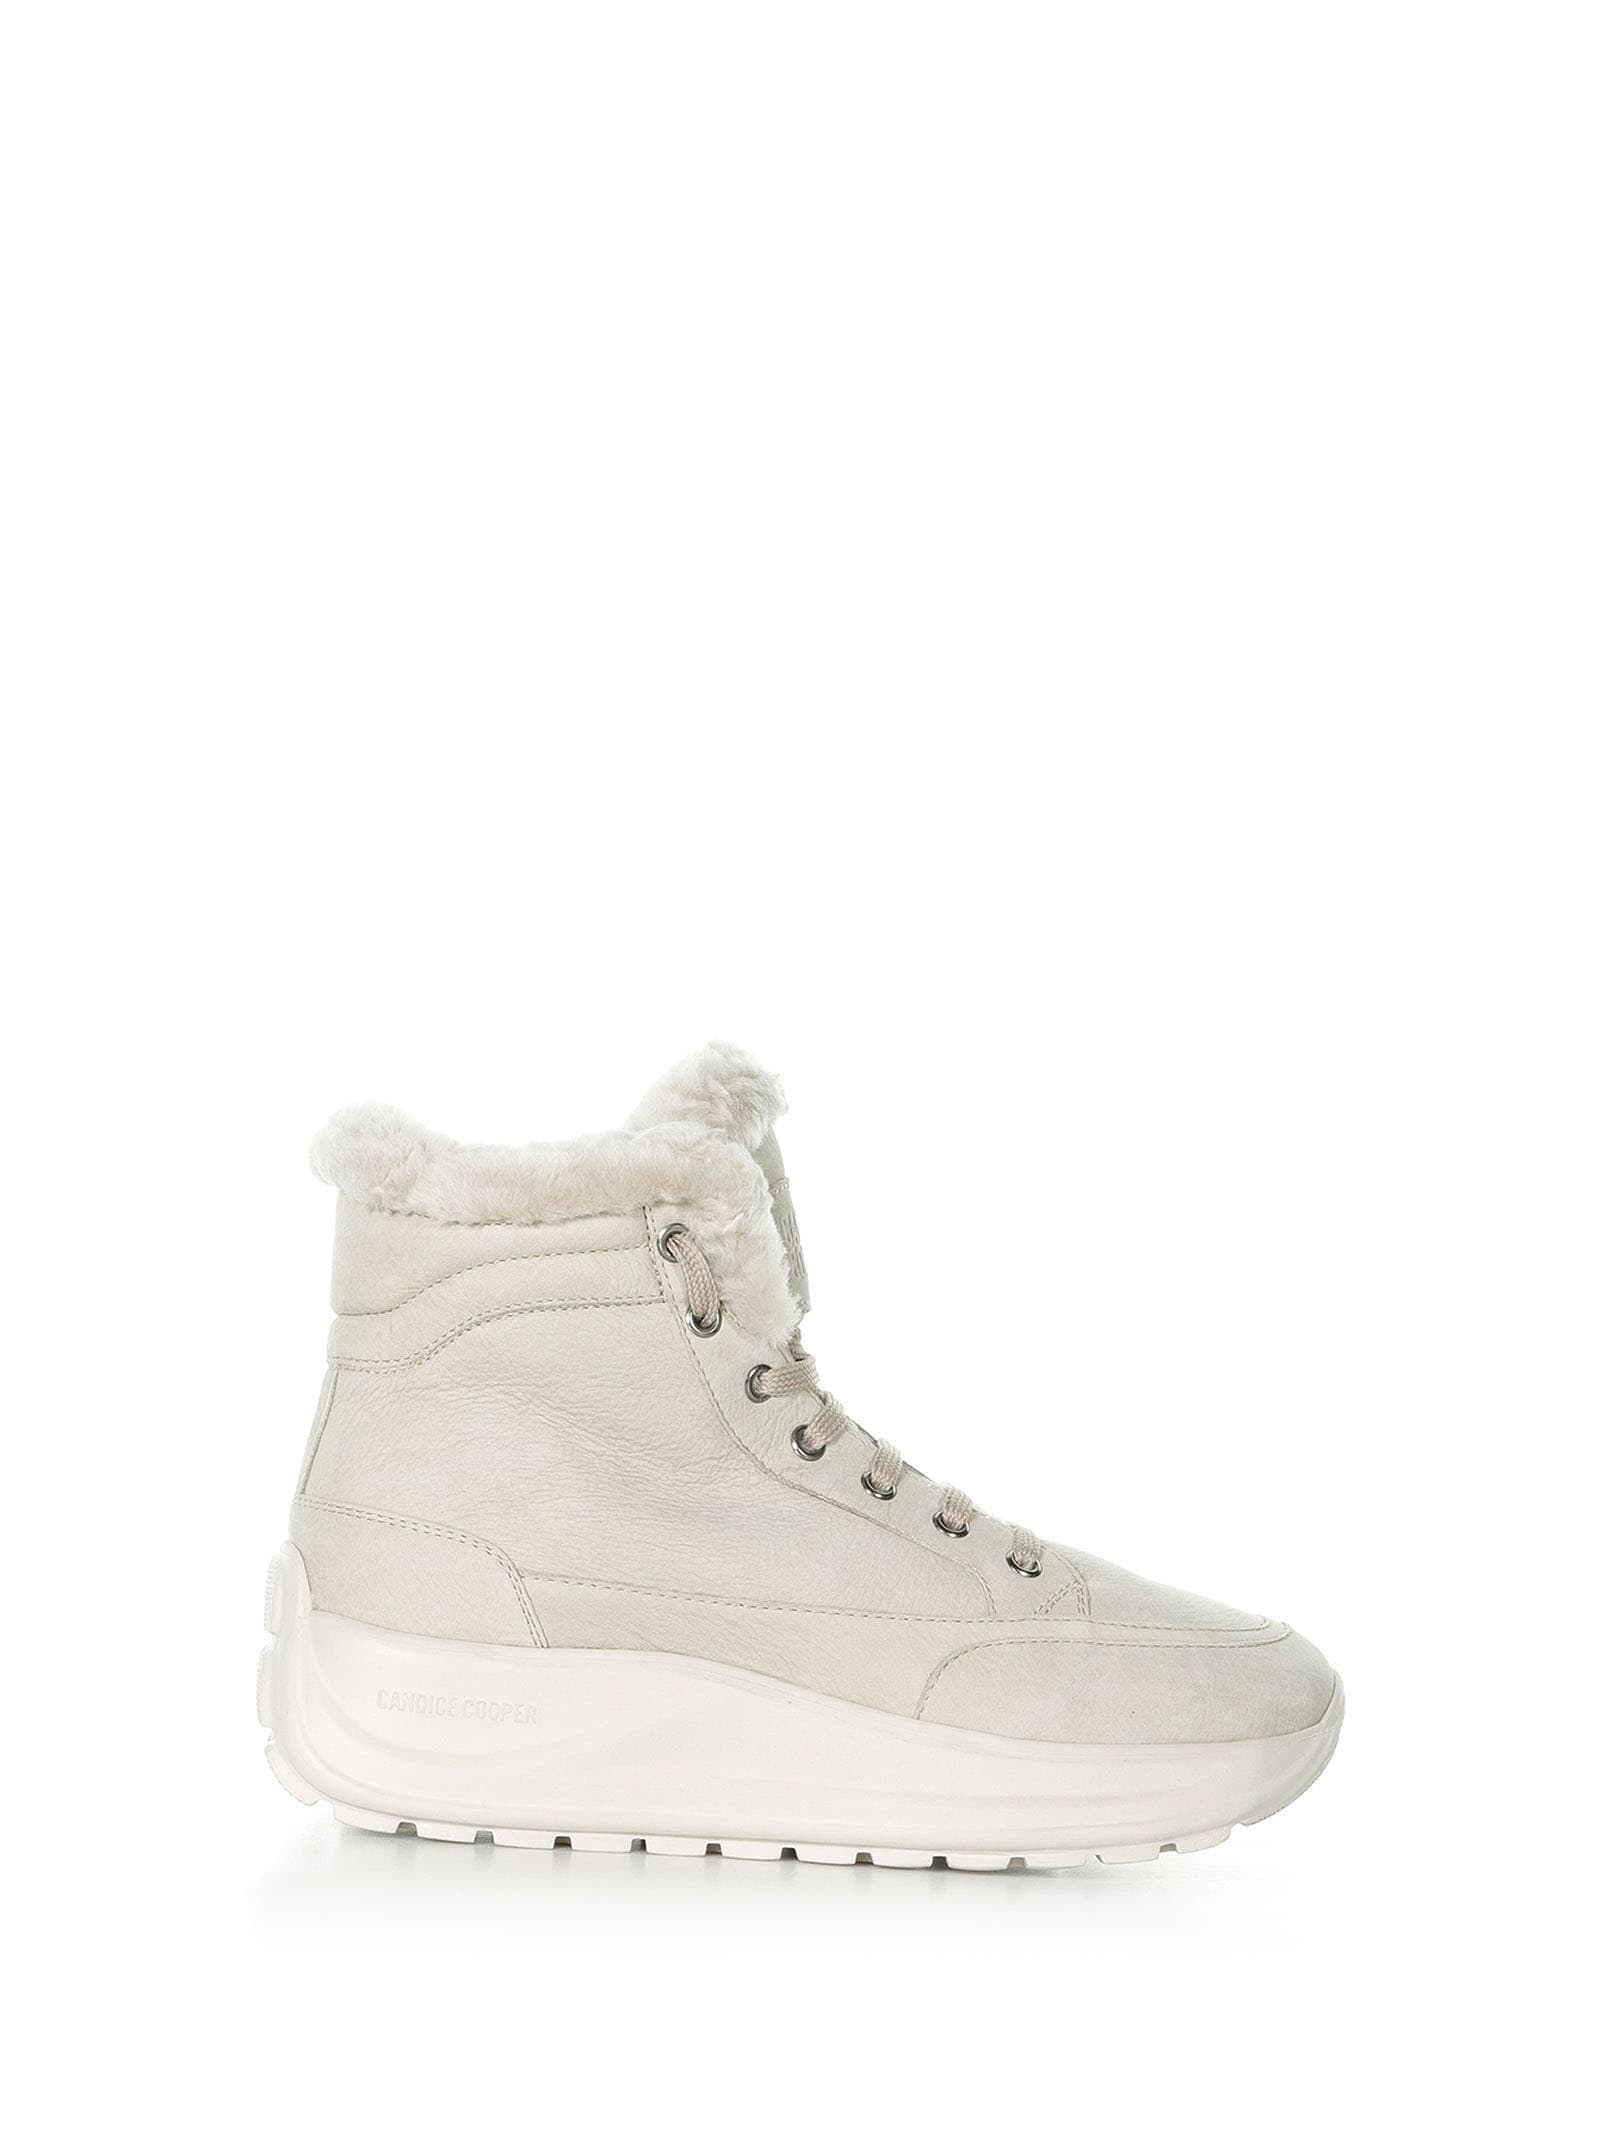 Candice Cooper White Sheepskin-lined Ankle Boot